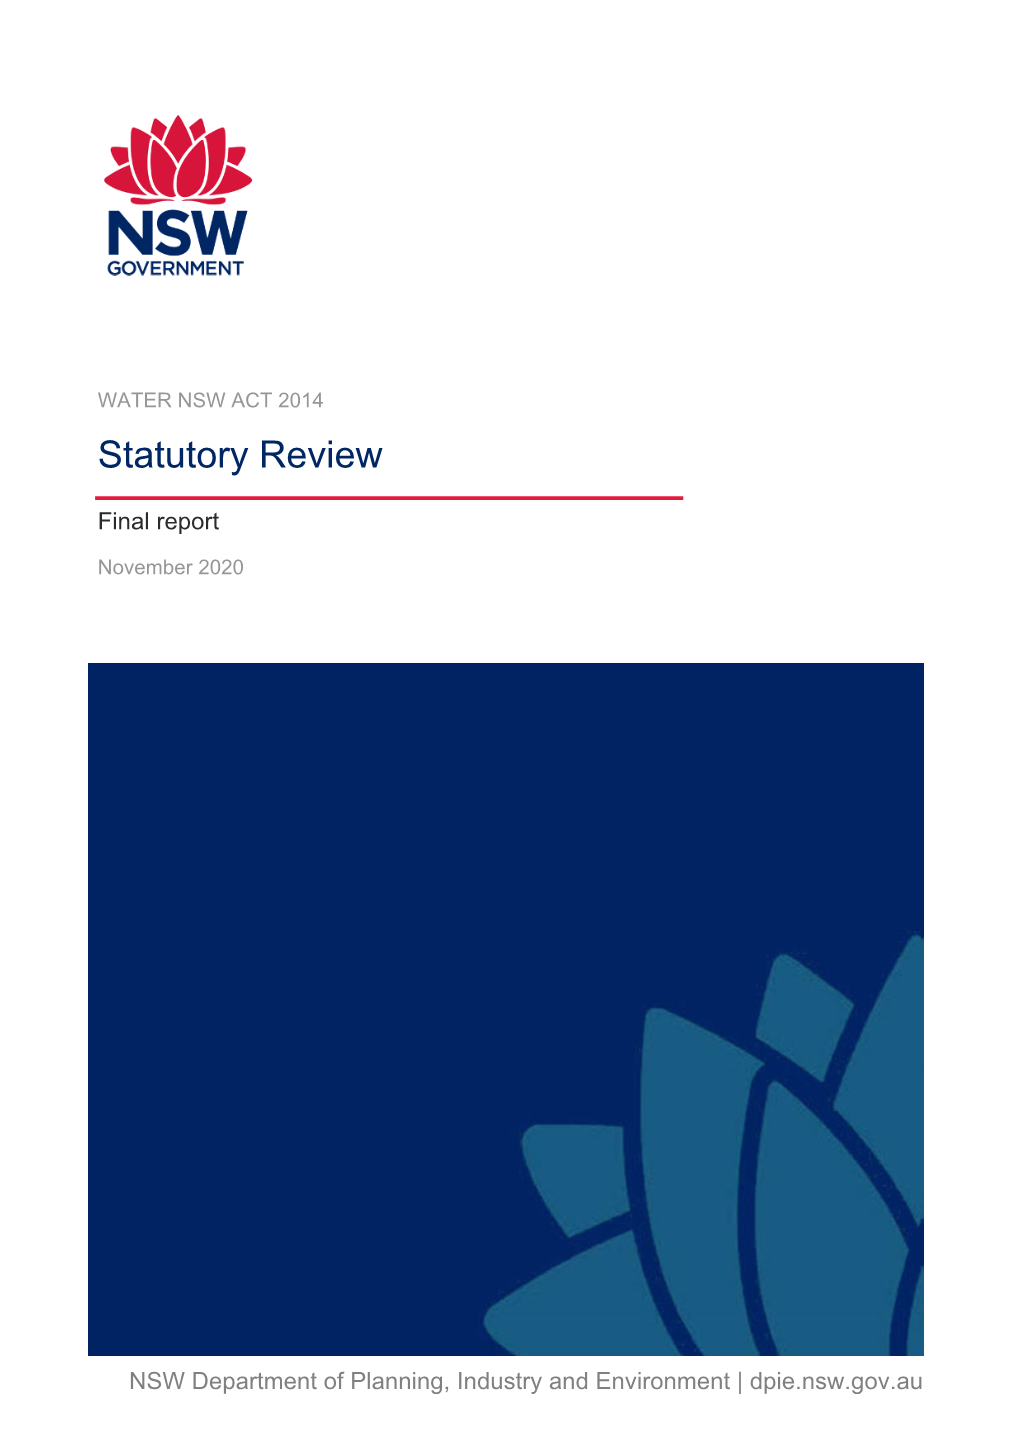 Water NSW Act Statutory Review Final Report 22/12/20 1. Executive